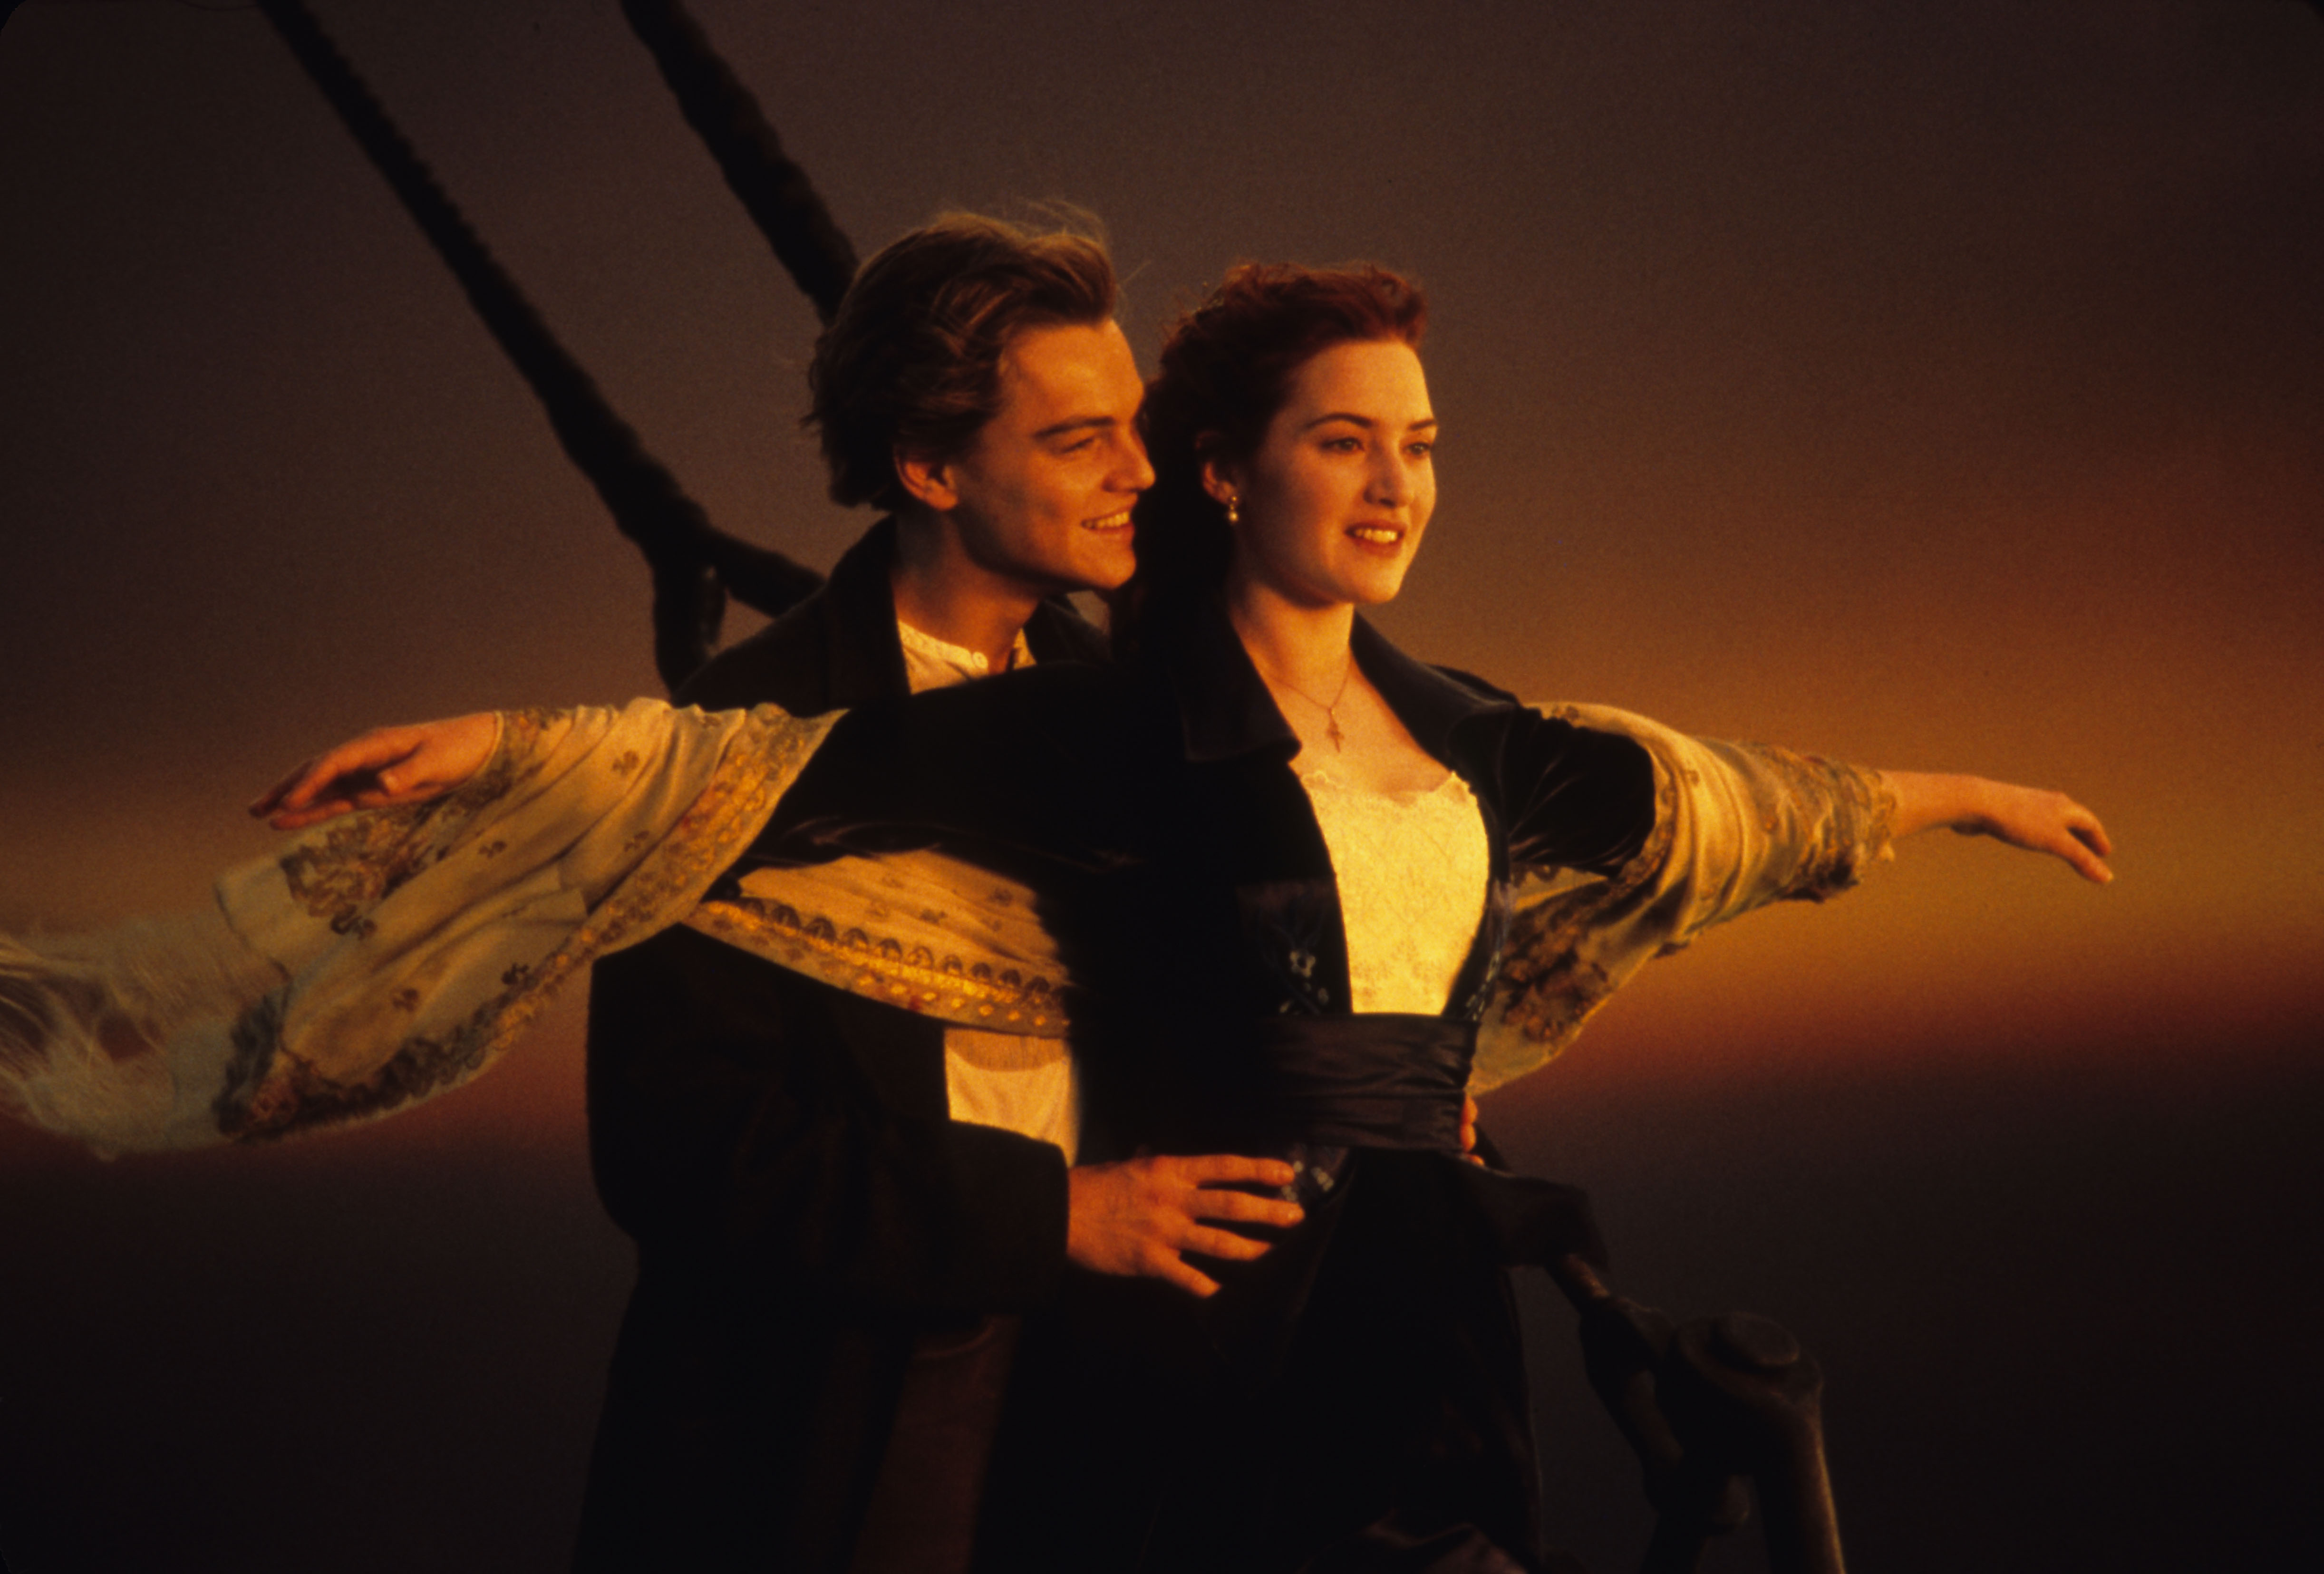 25 years of Titanic: Unknown facts about Jack and Rose's classic love story